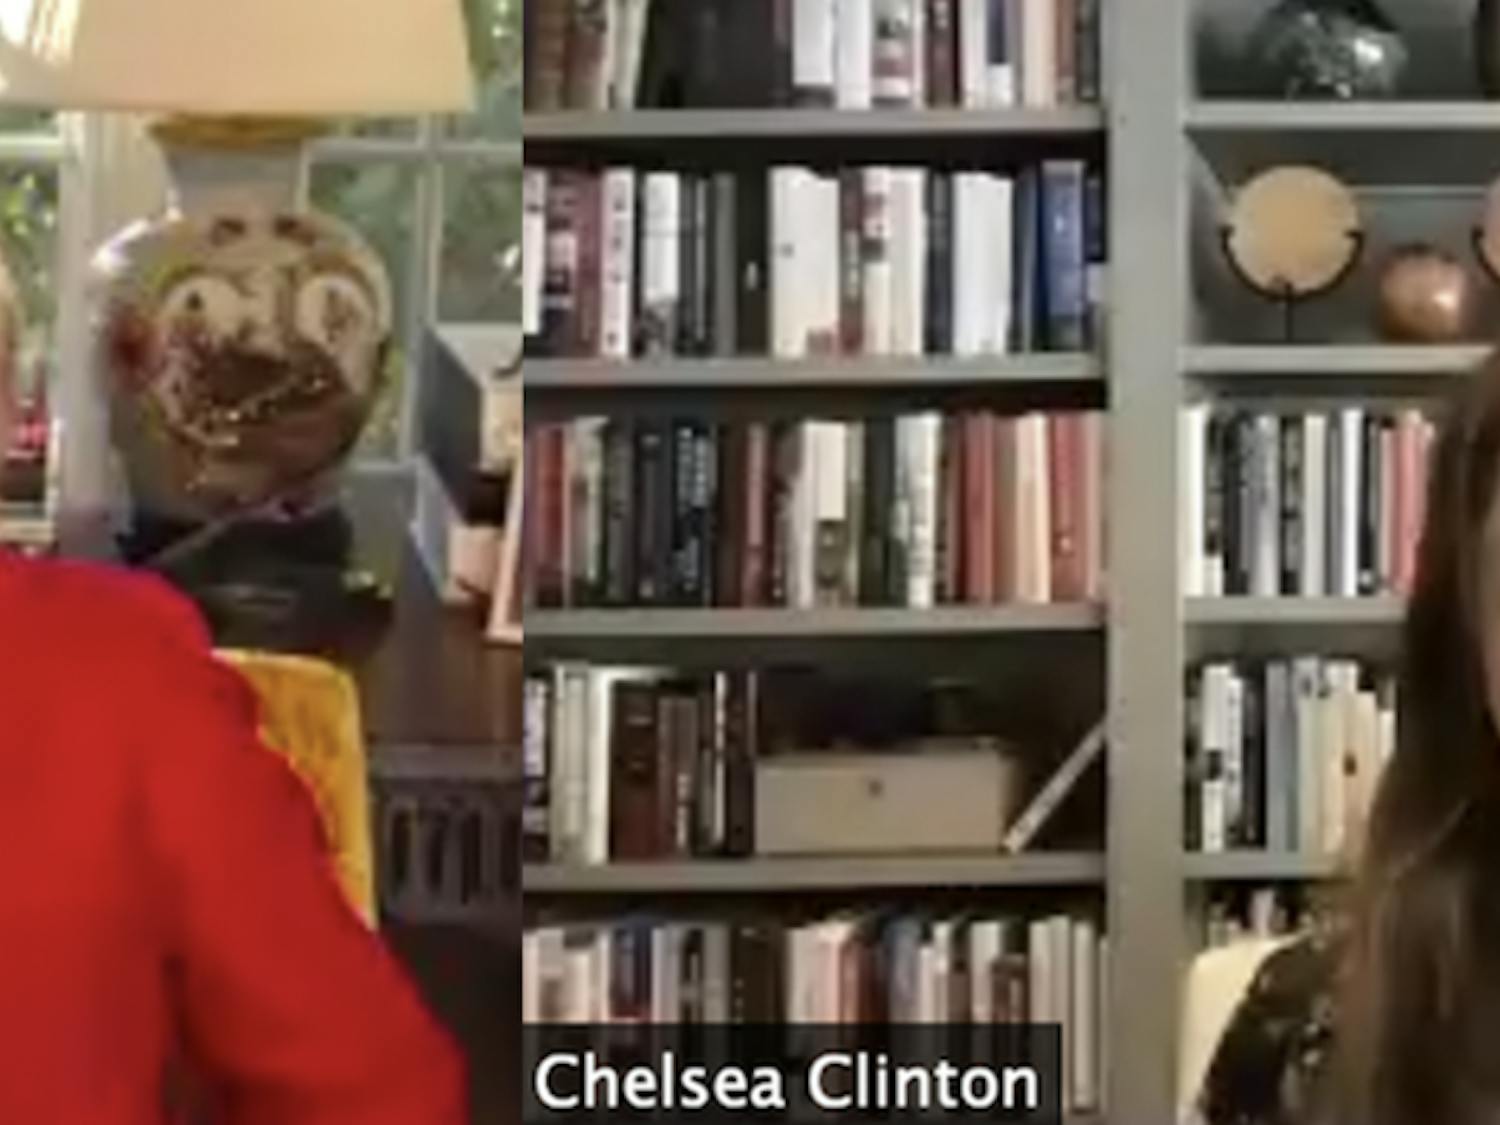 hillarychelsea.png